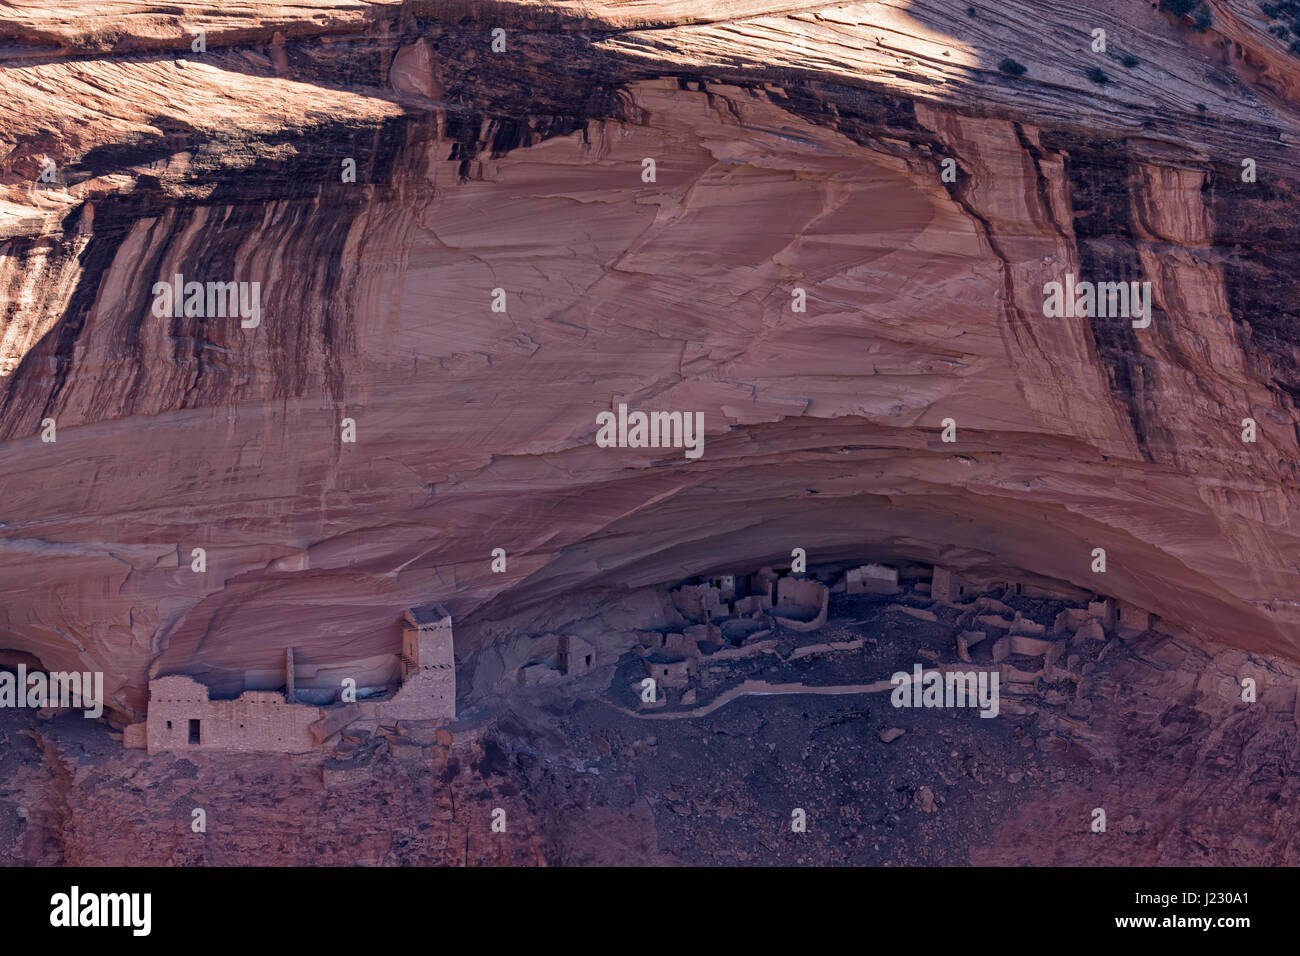 USA, Arizona, Canyon de Chelly National Monument, Canyon del Muerto, Mummy Cave, ruins of Pueblo Indians Stock Photo